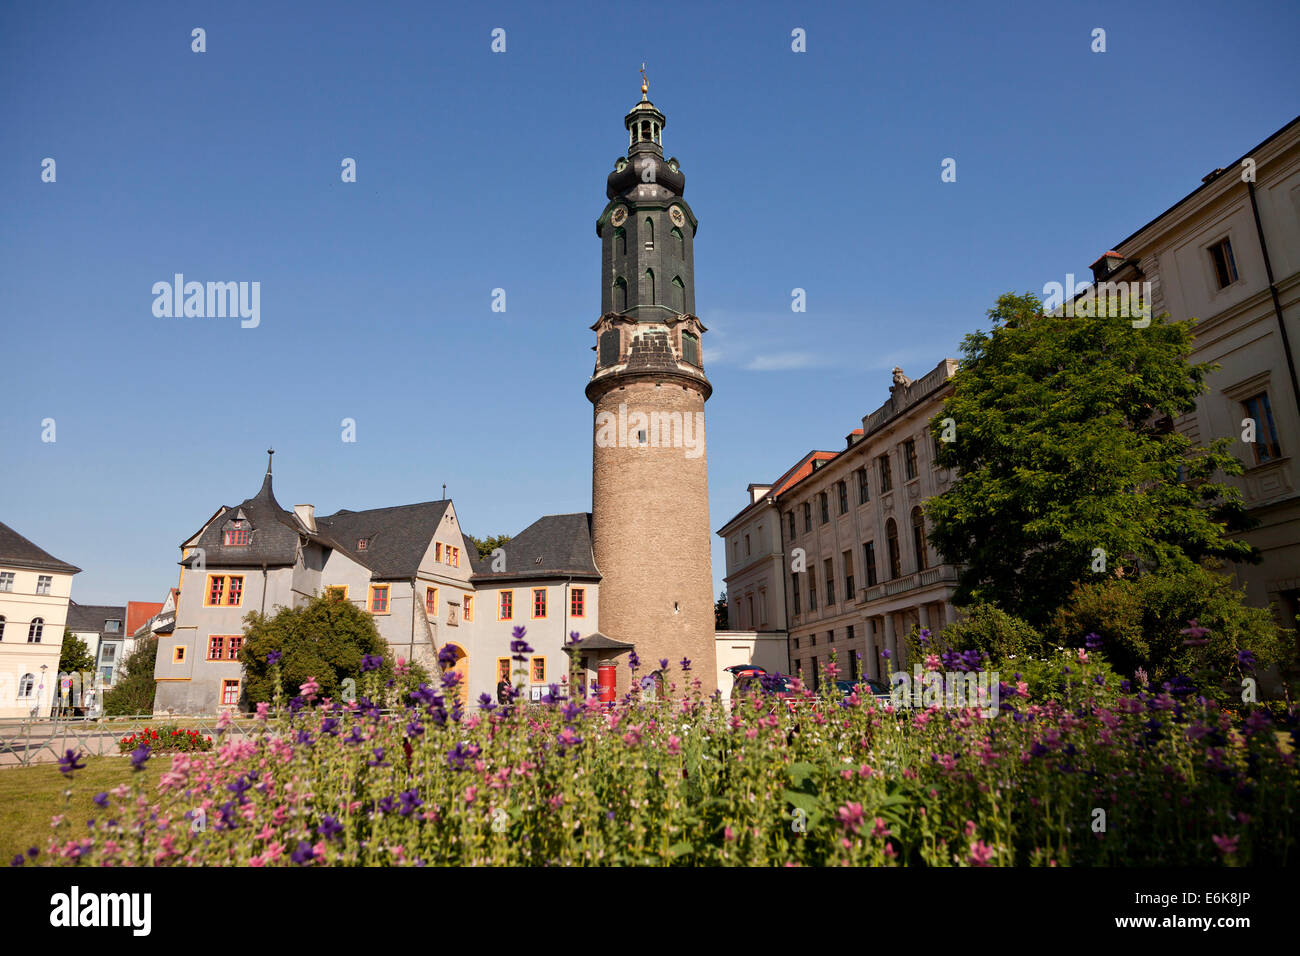 tower of the palace Stadtschloss or Schloss Weimar in Weimar, Thuringia, Germany, Europe Stock Photo